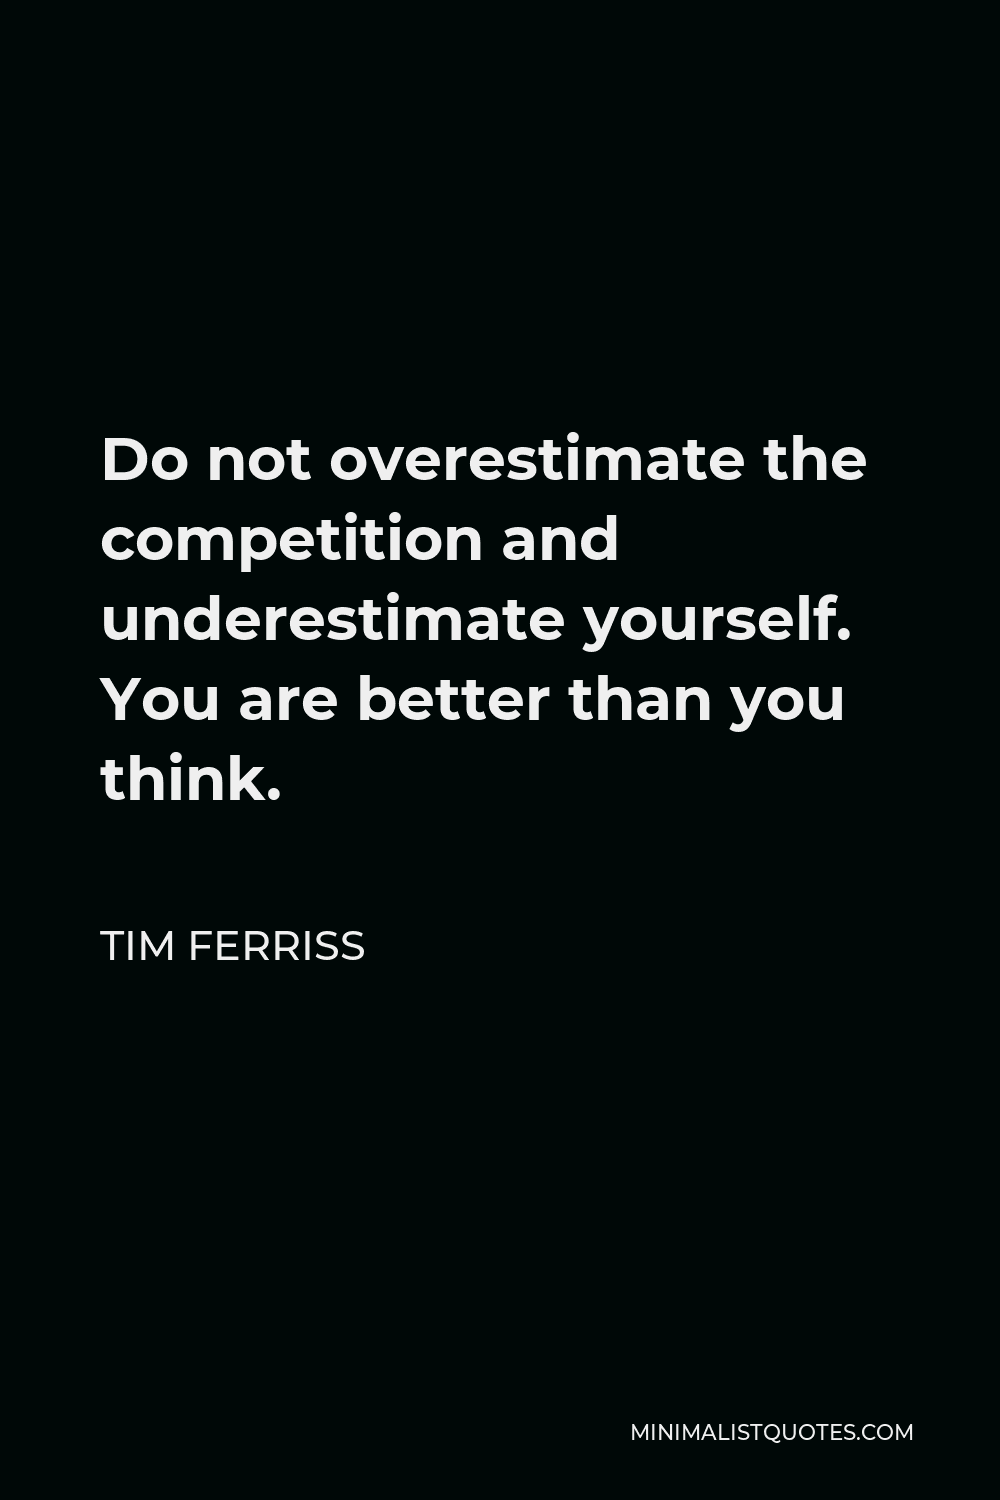 Tim Ferriss Quote - Do not overestimate the competition and underestimate yourself. You are better than you think.